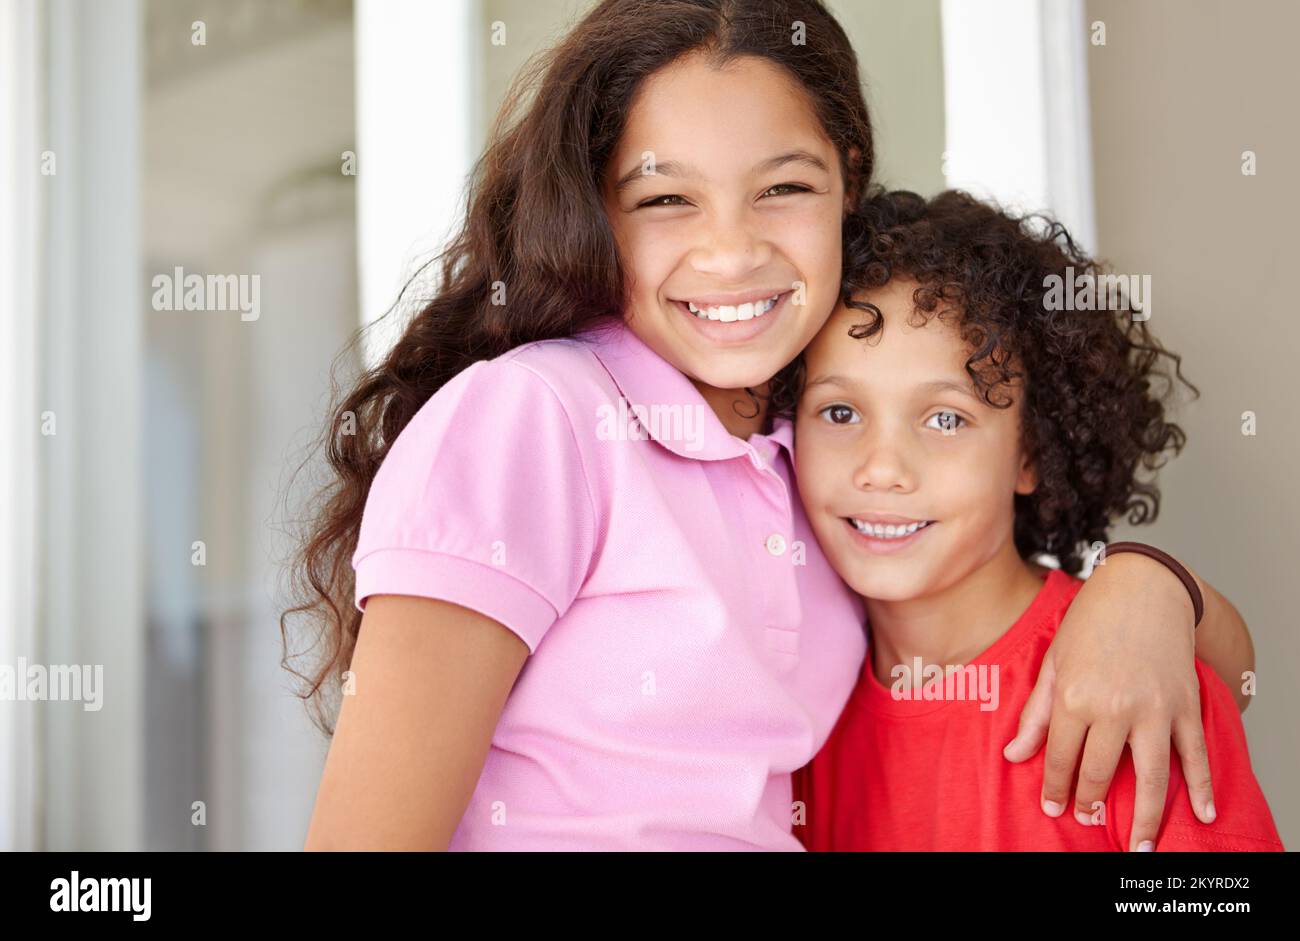 Loving siblings. Portrait of an affection young brother and sister. Stock Photo